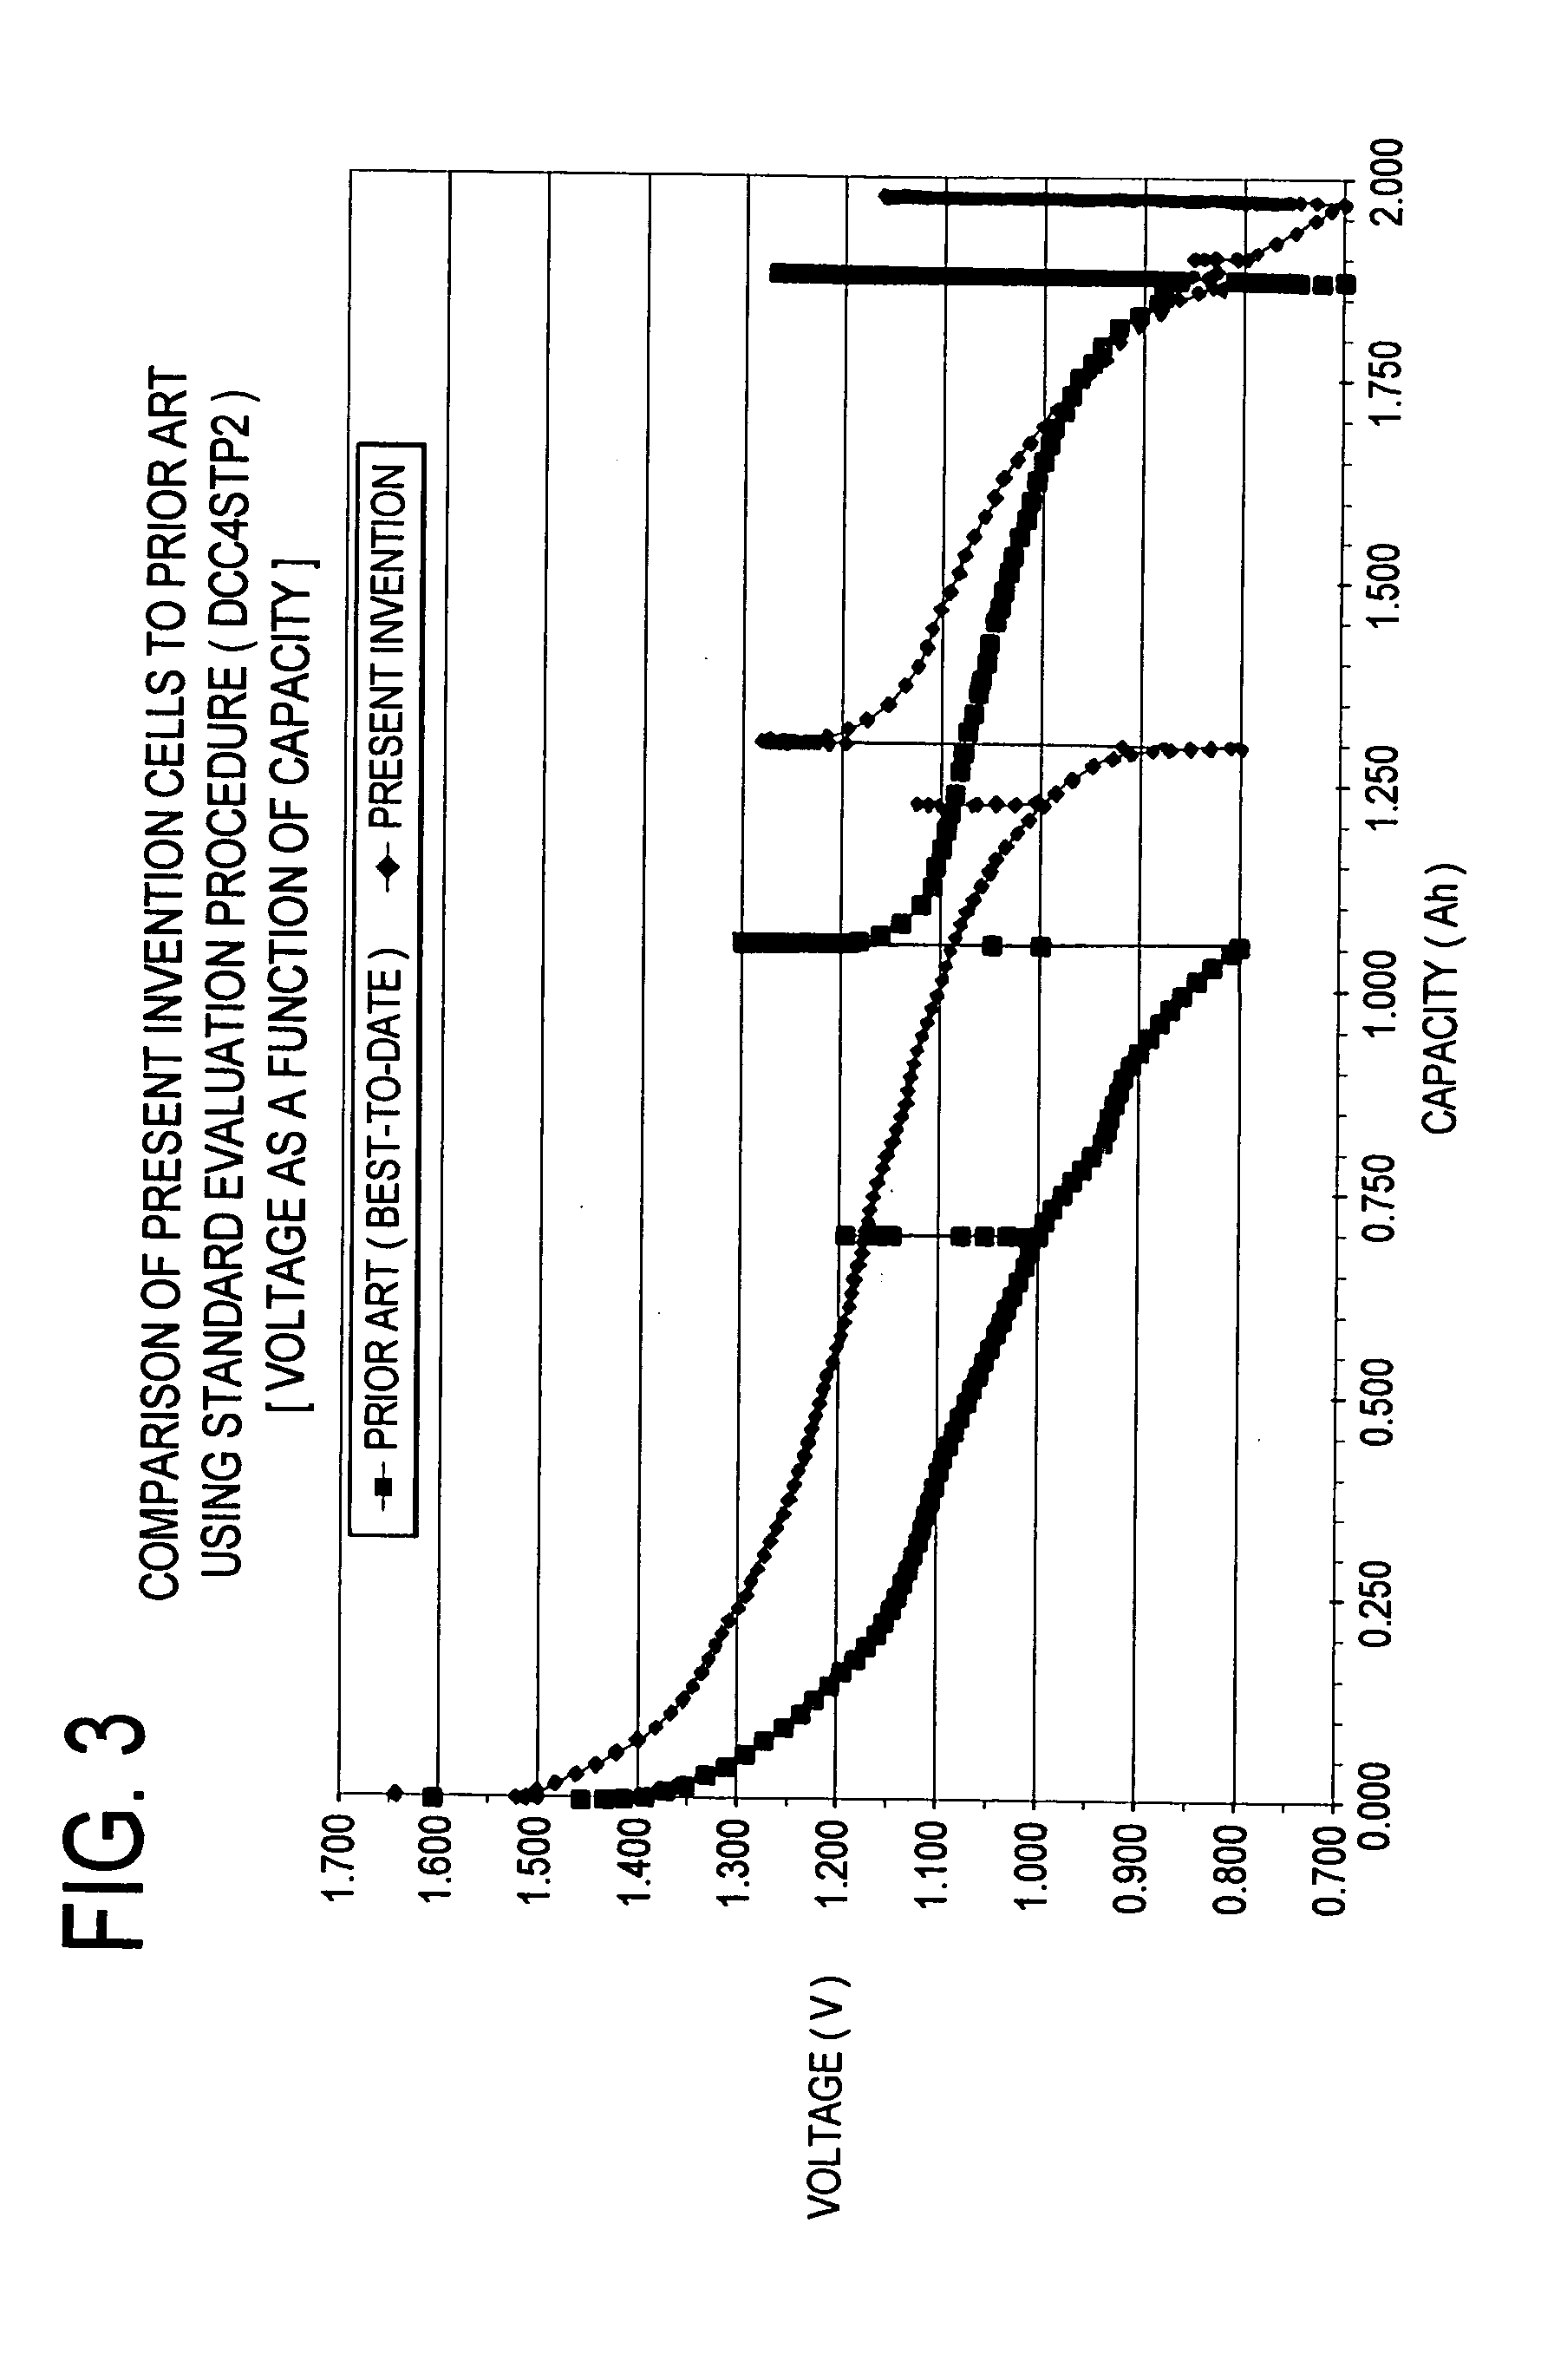 Cylindrical battery cell having improved power characteristics and methods of manufacturing same